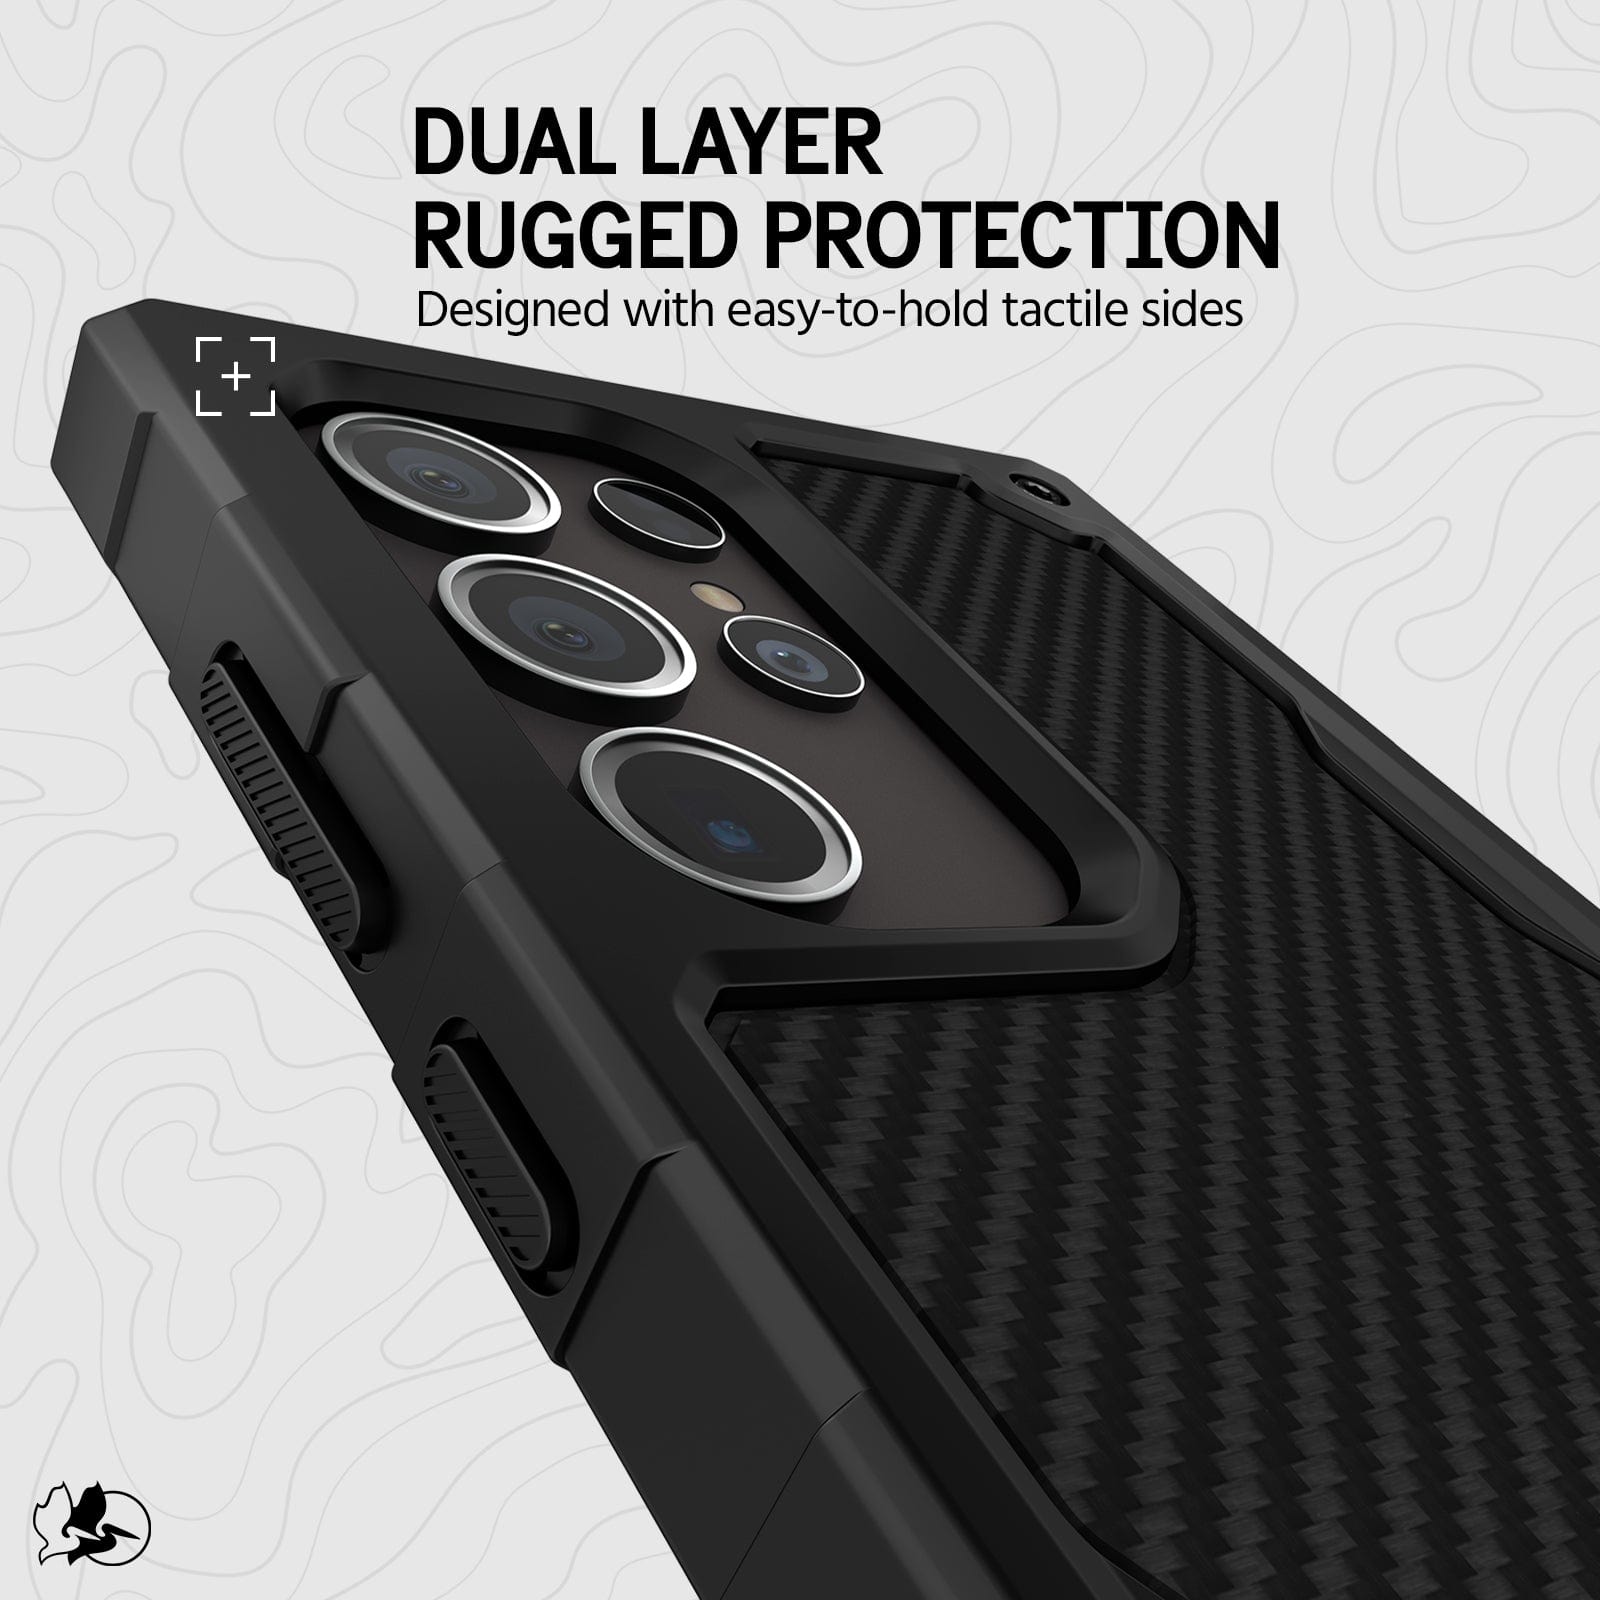 DUAL LAYER RUGGED PROTECTION DESIGNED WITH EASY-TO-HOLD TACTILE SIDES